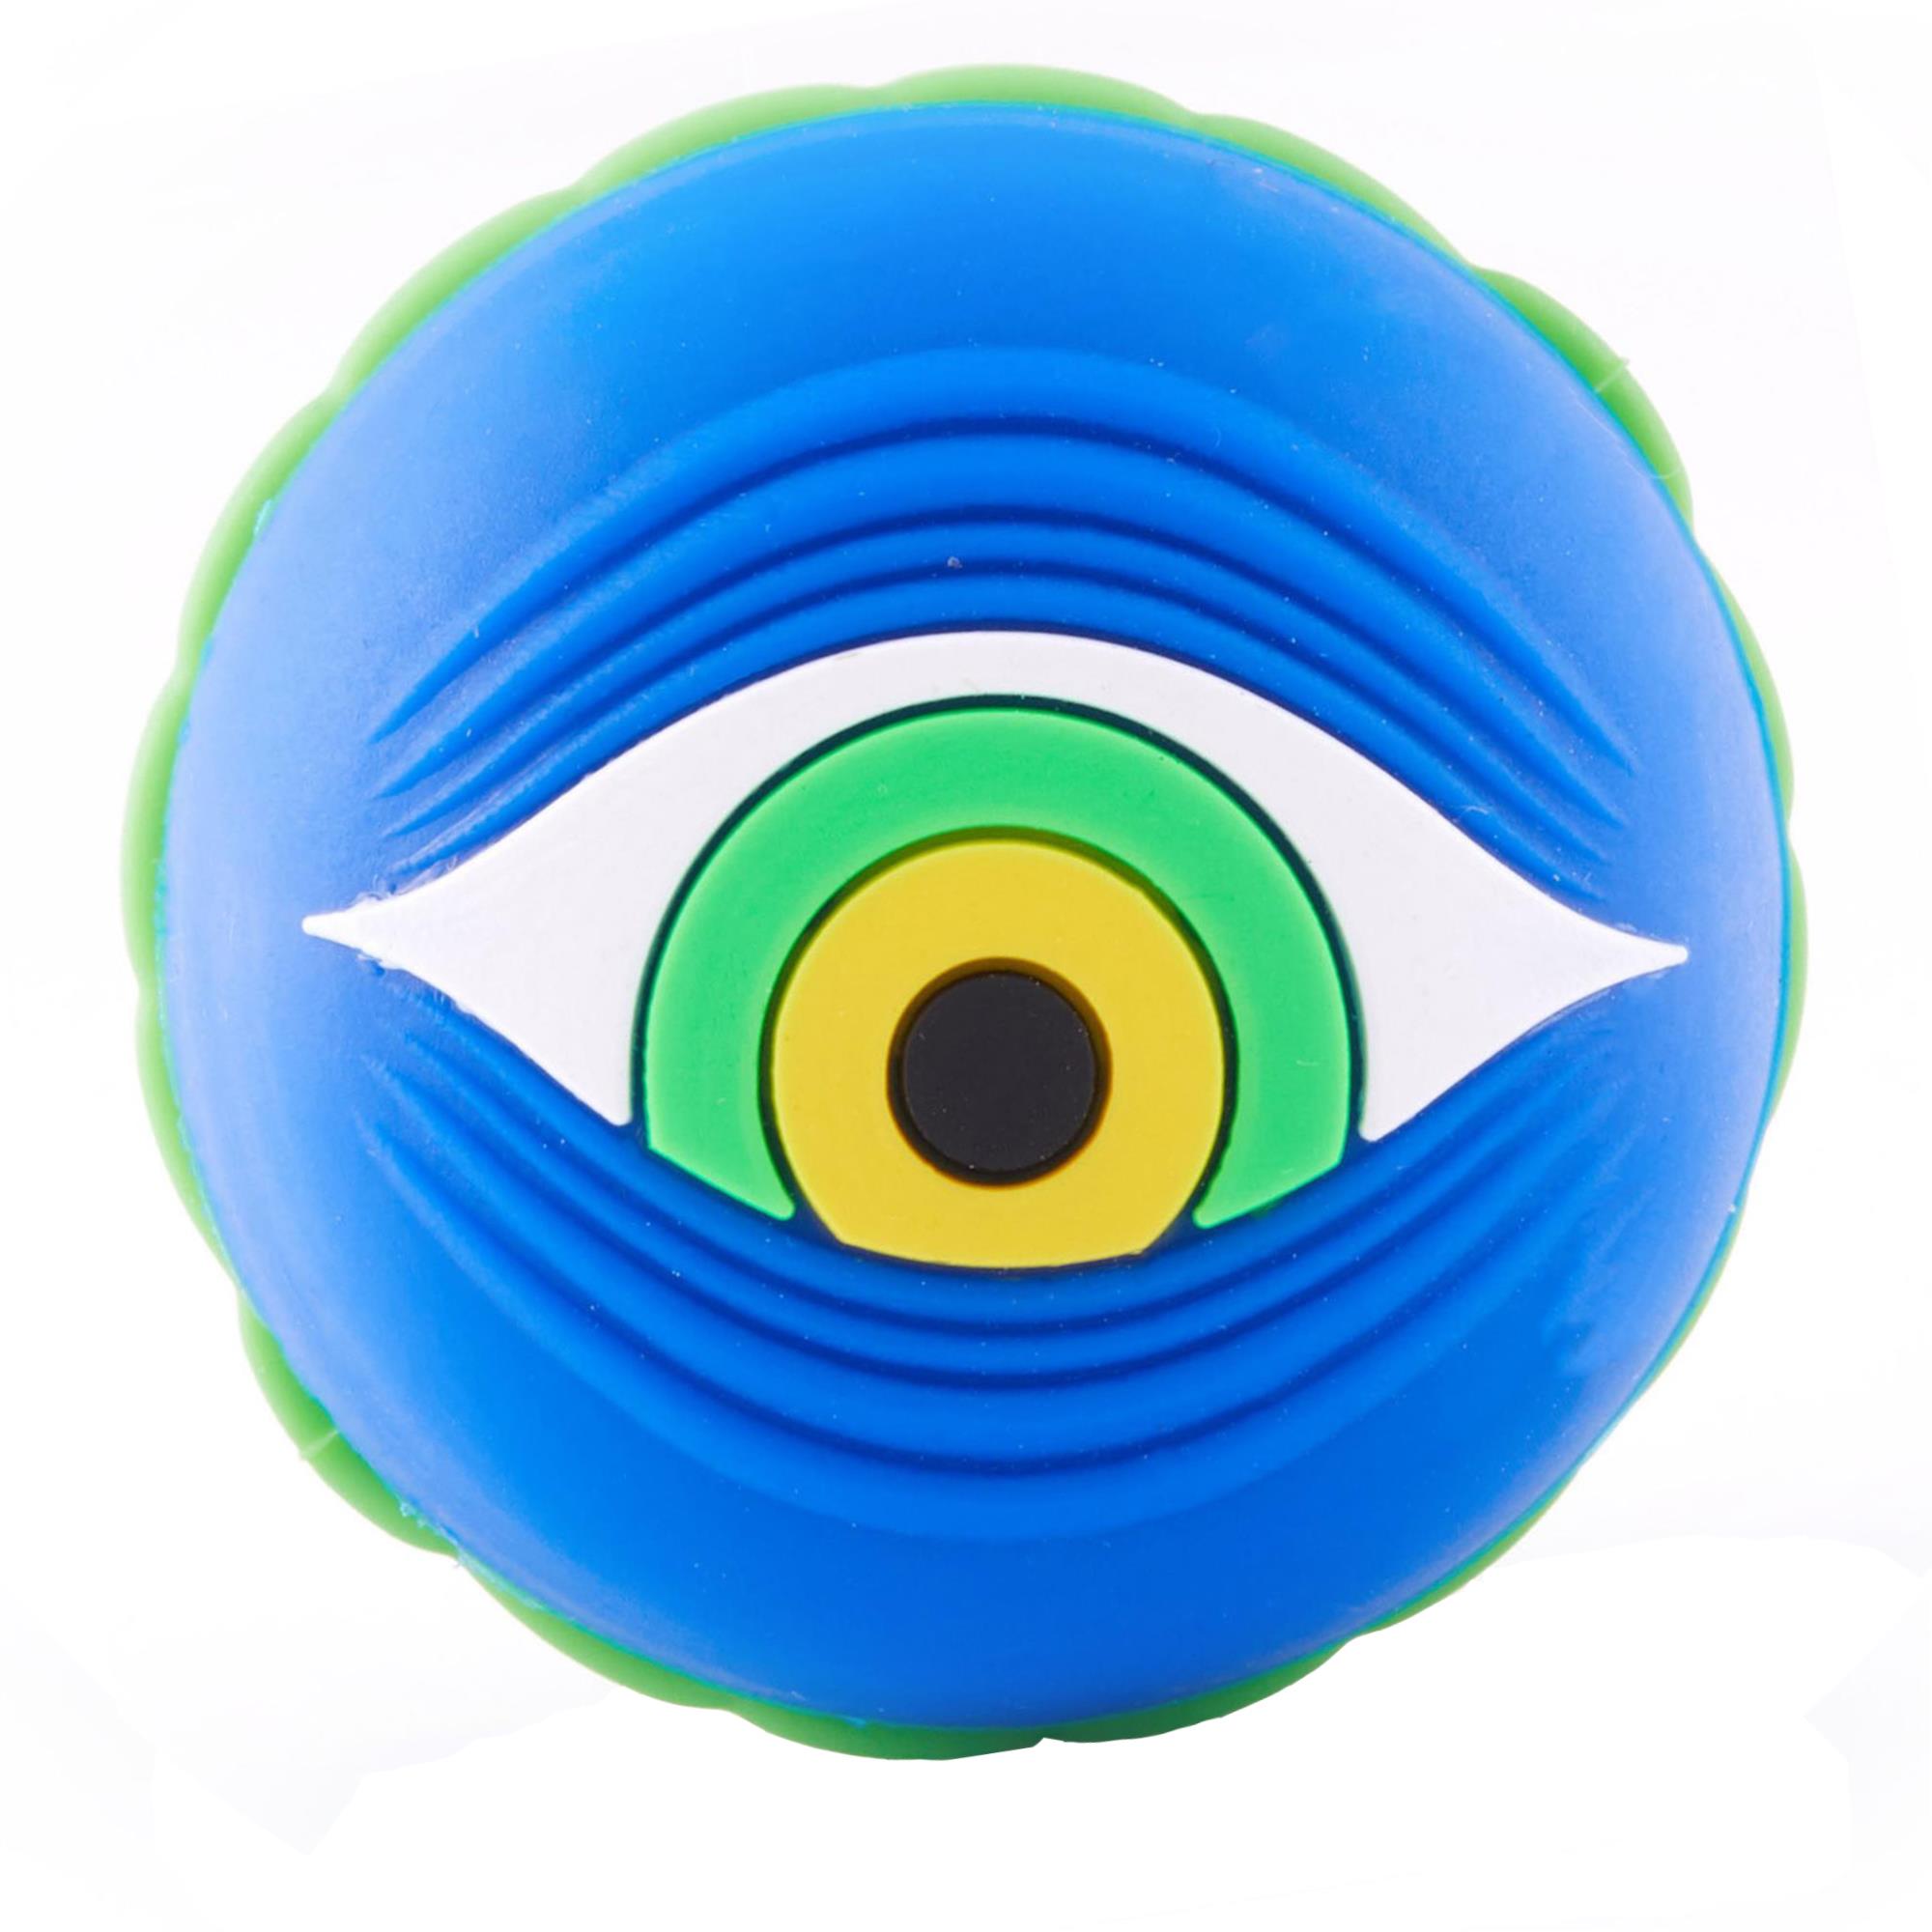 MAGIC EYE SILICONE CONTAINER